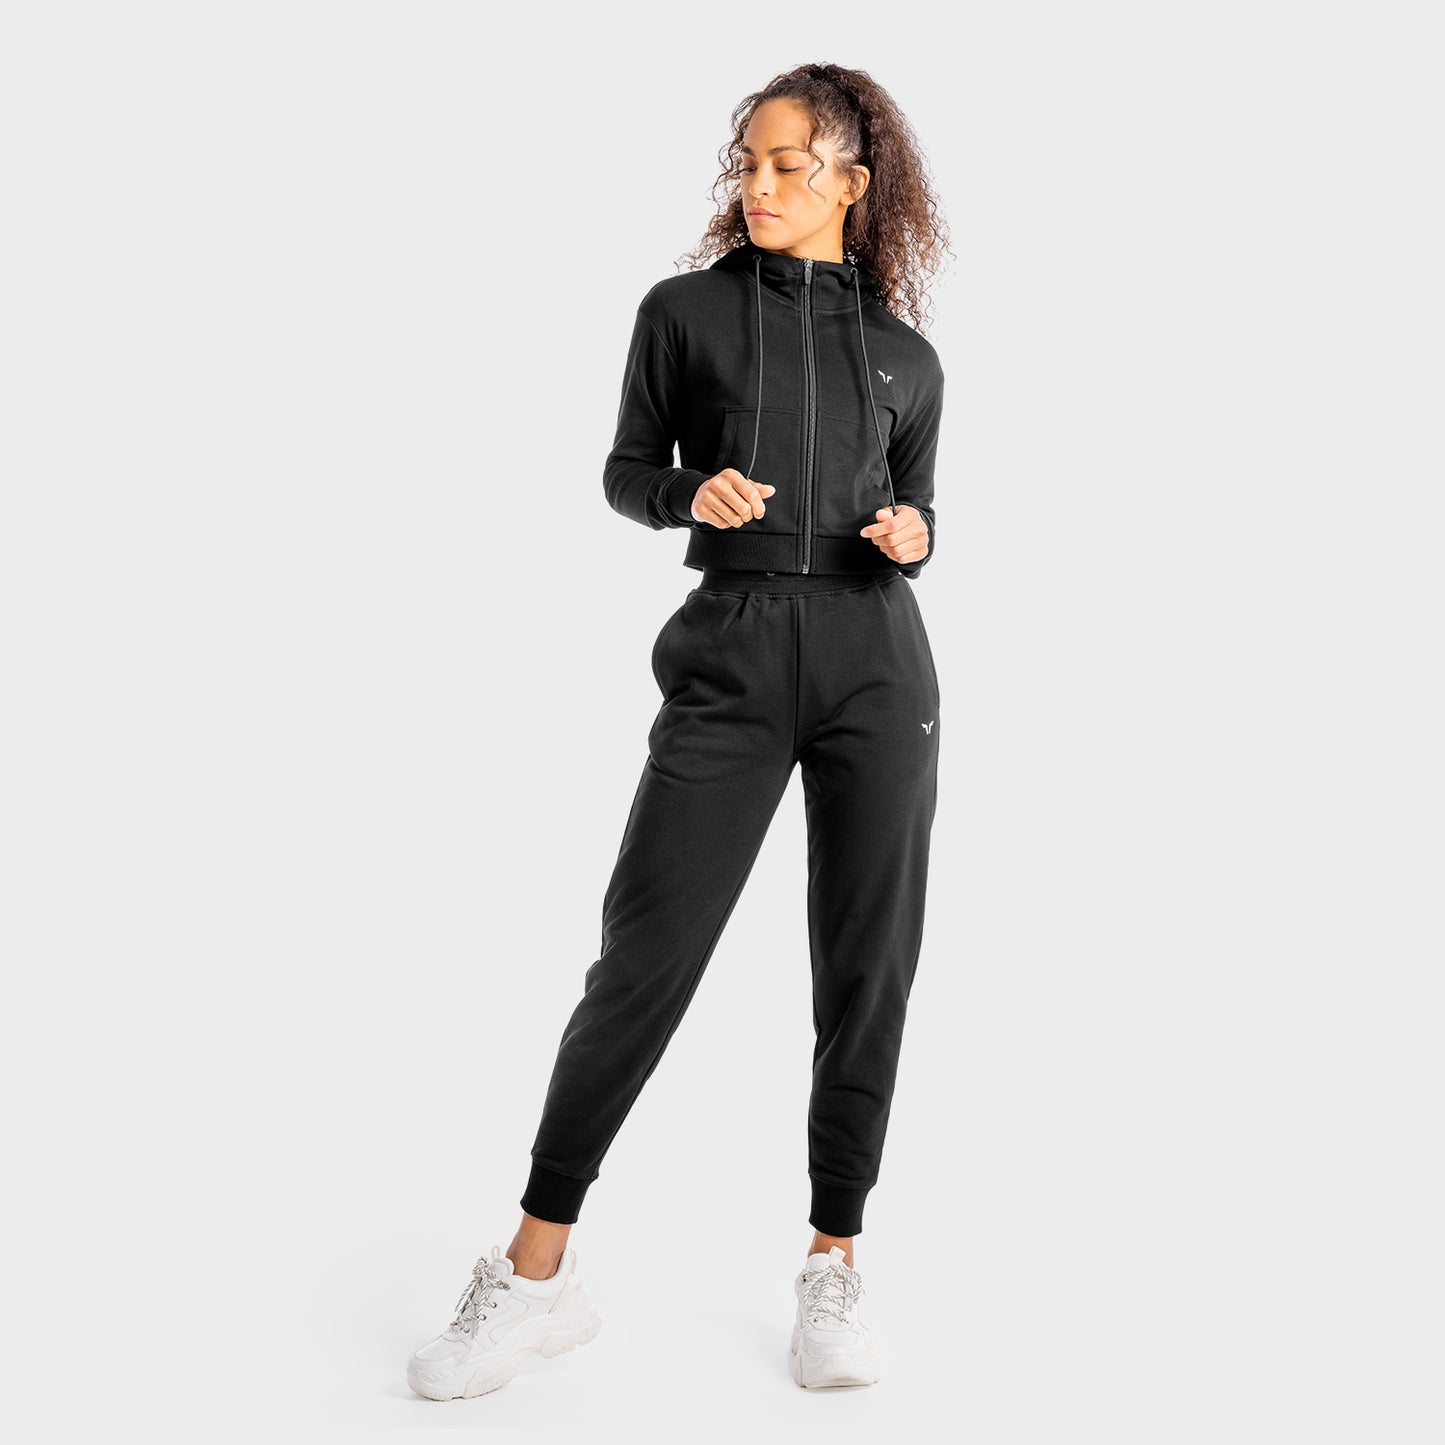 squatwolf-gym-hoodies-women-core-zip-up-onyx-workout-clothes